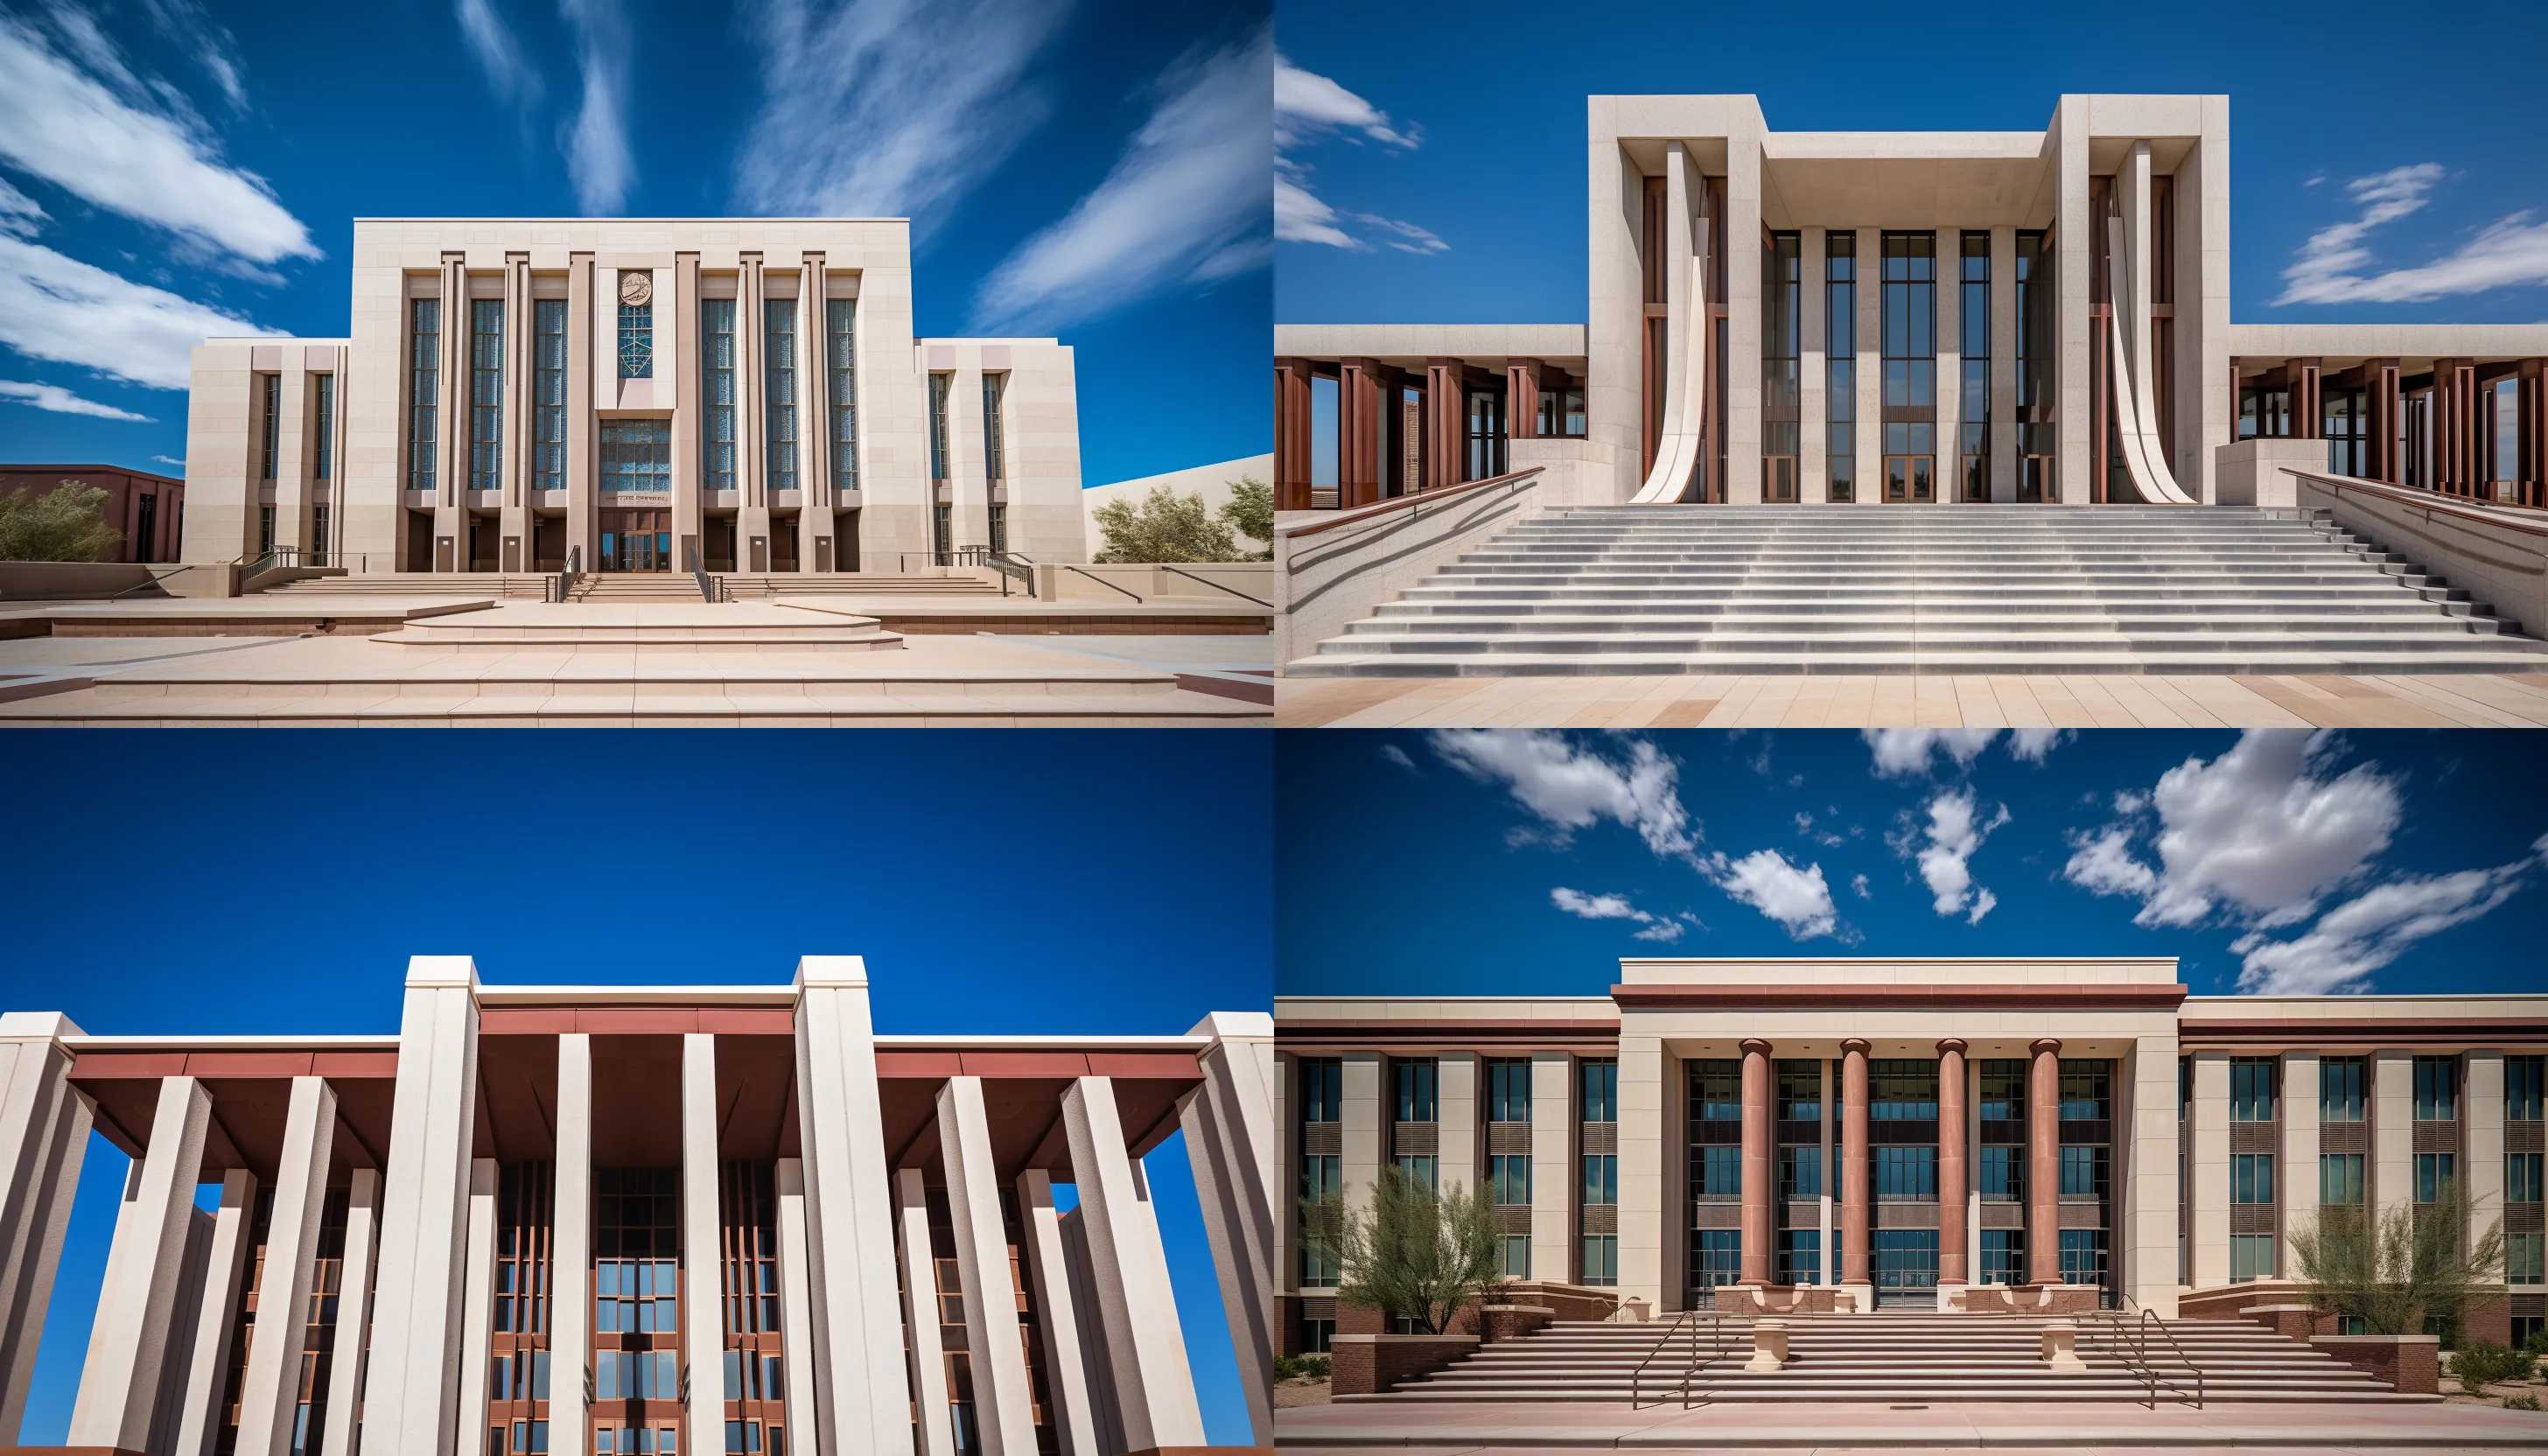 An image of the Arizona Supreme Court building, captured with a Sony Alpha 7III, showing its impressive architecture against a clear, azure sky.